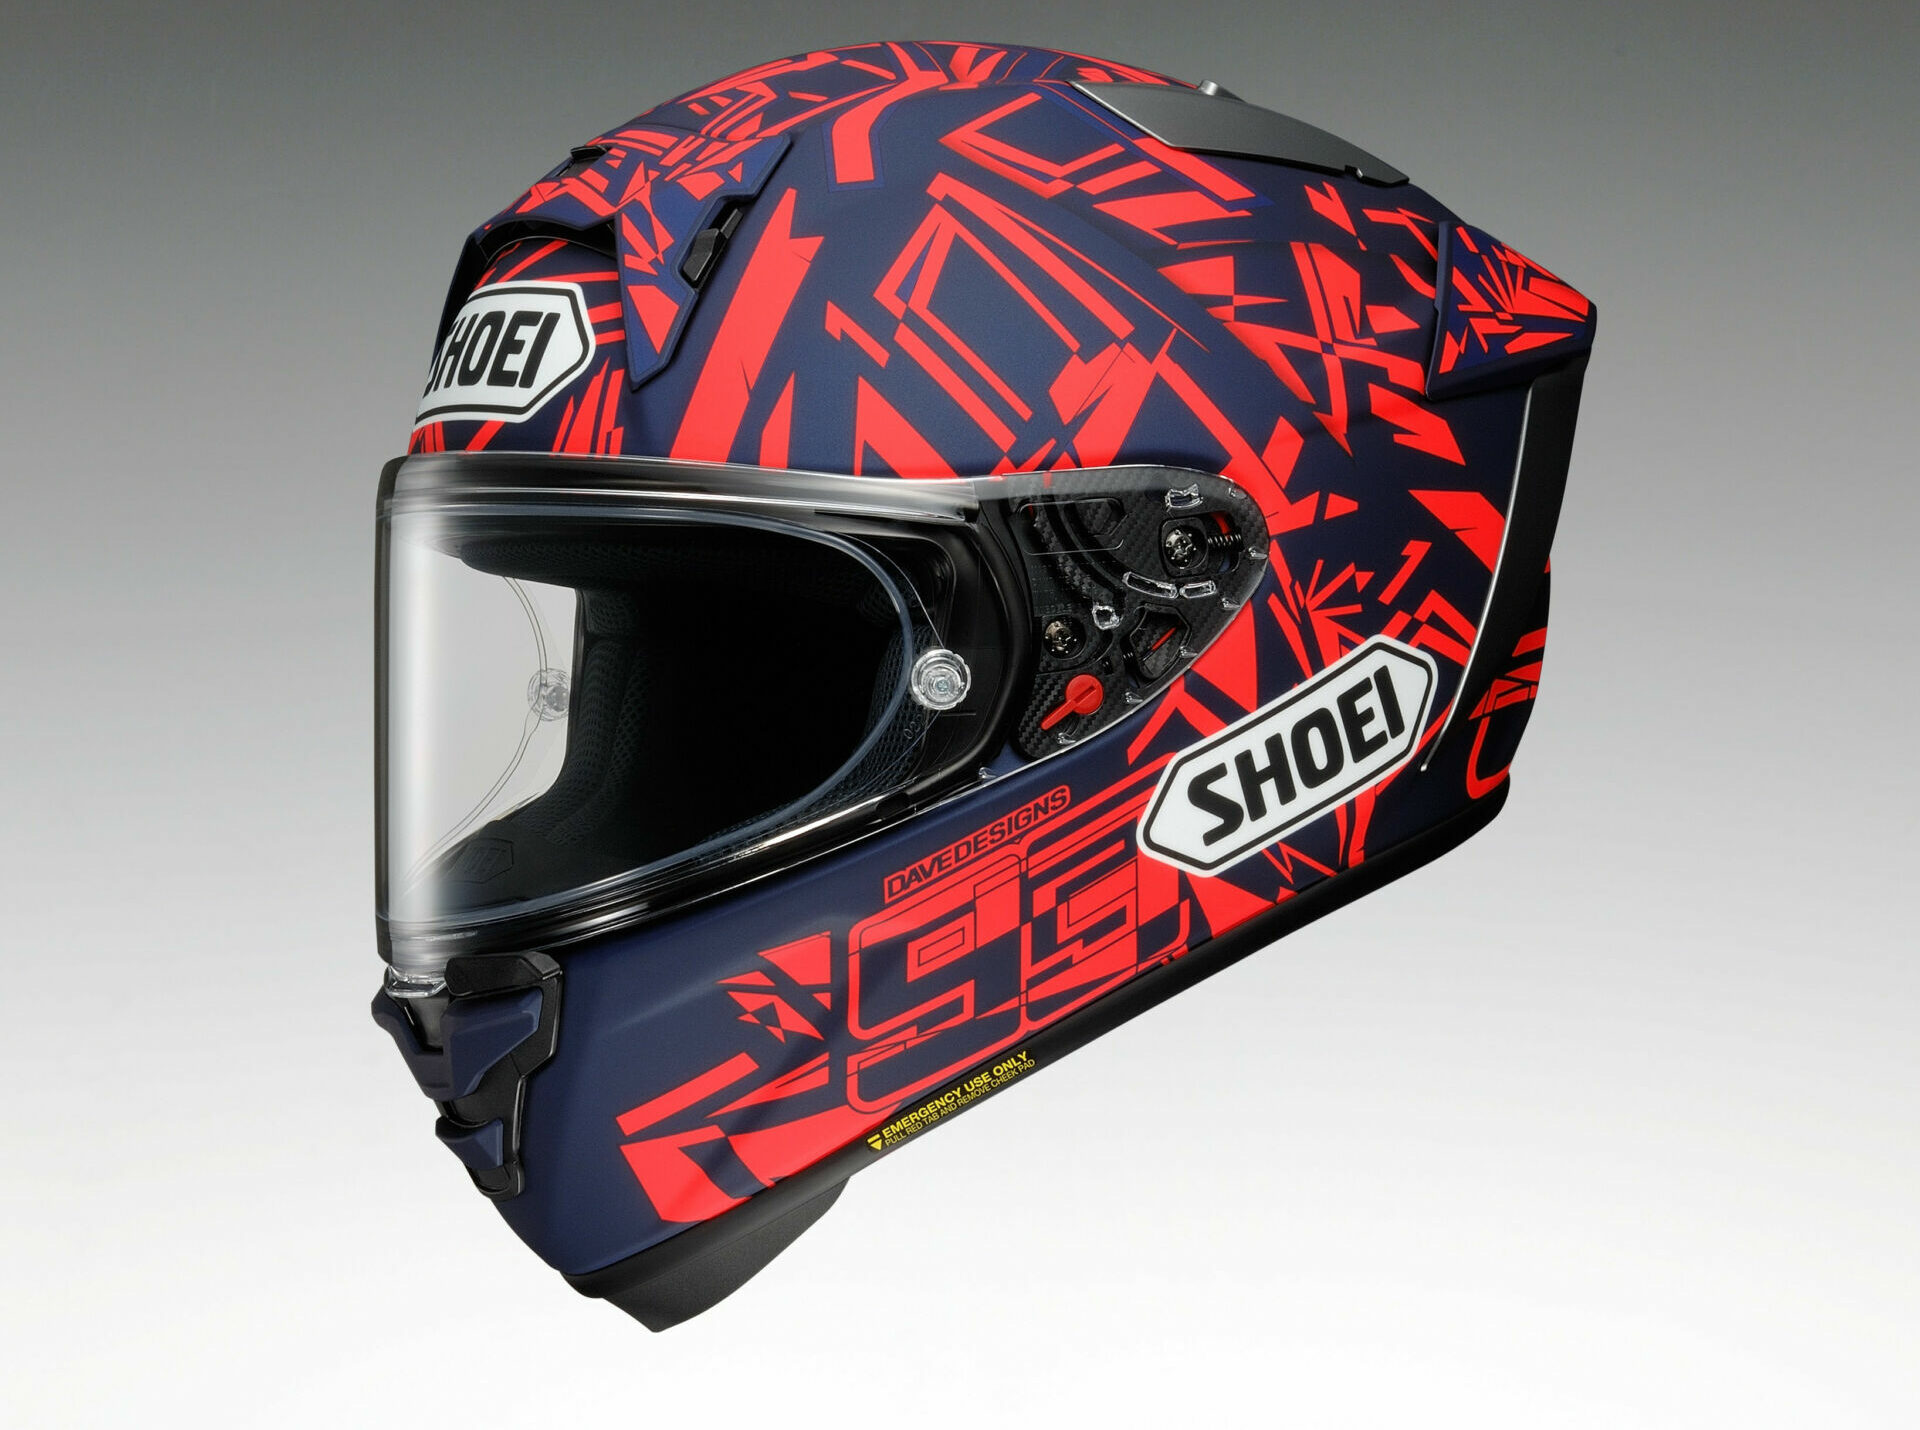 Shoei's new X-Fifteen helmet is available in two different Marc Marquez Replicas. Photo courtesy Shoei.